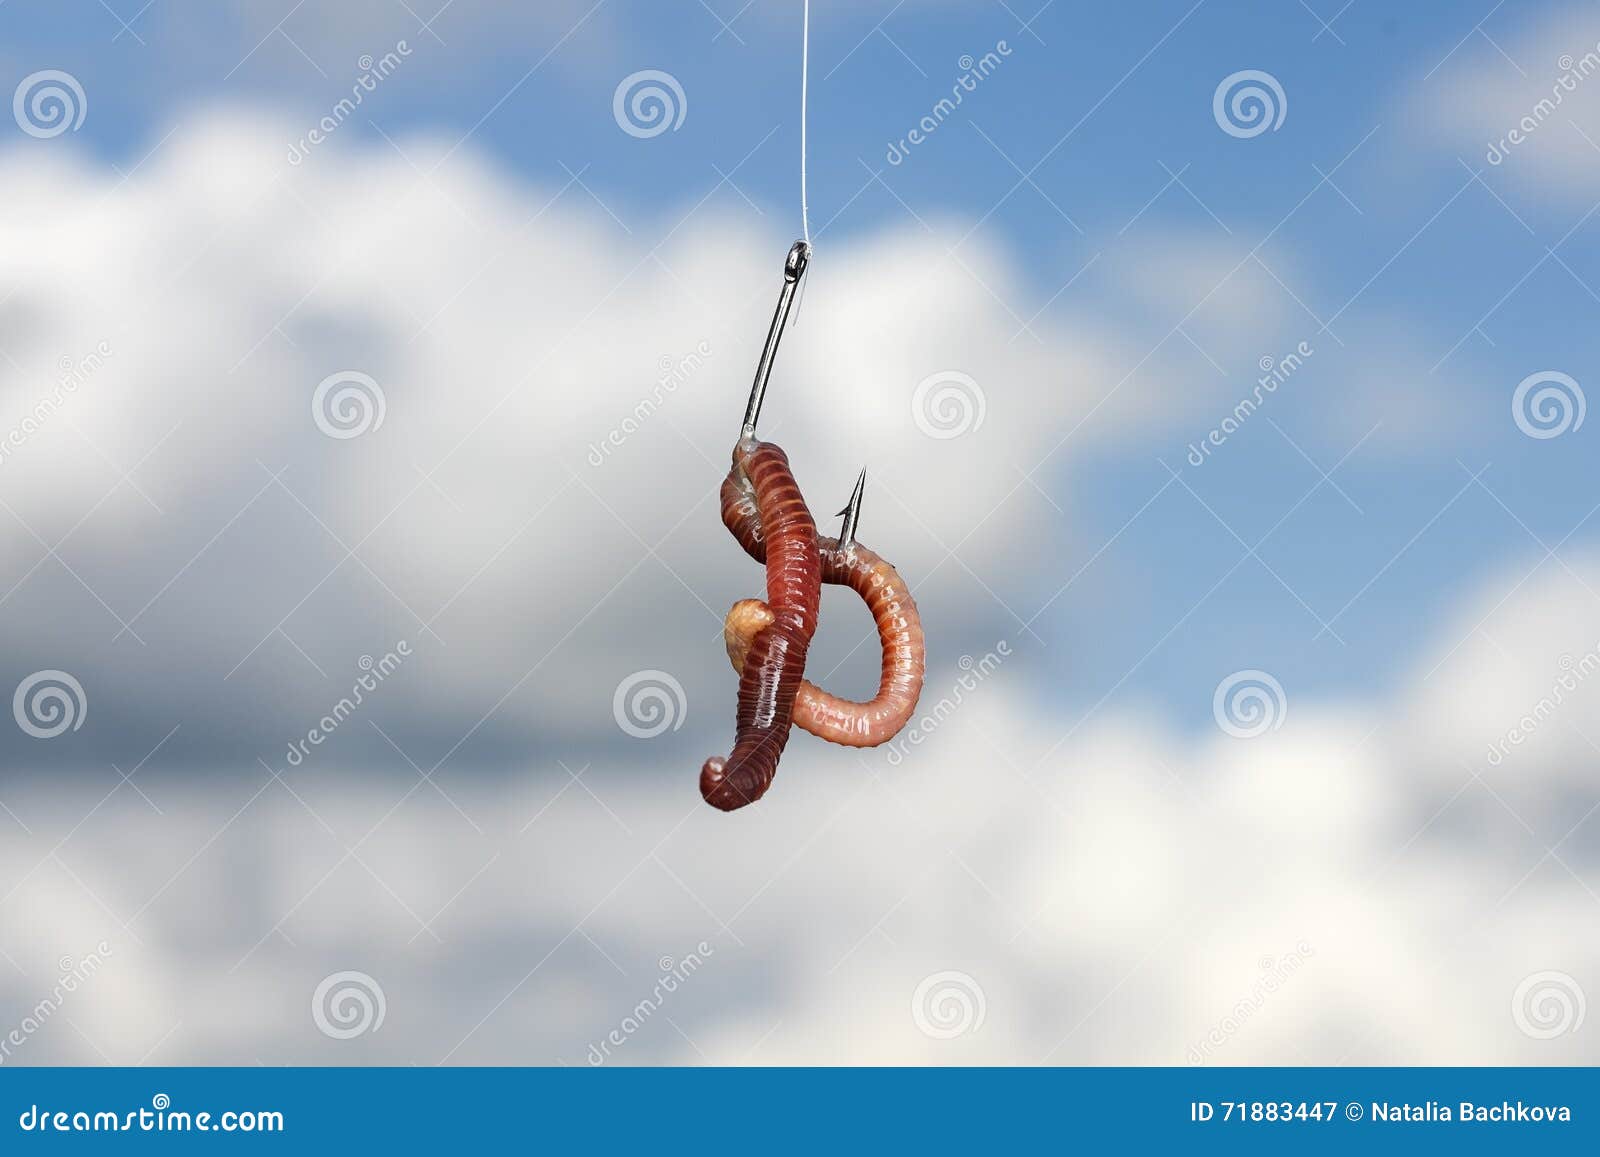 Red Metal Worm Writhing on a Fish Hook Stock Image - Image of grass,  hanging: 71883447